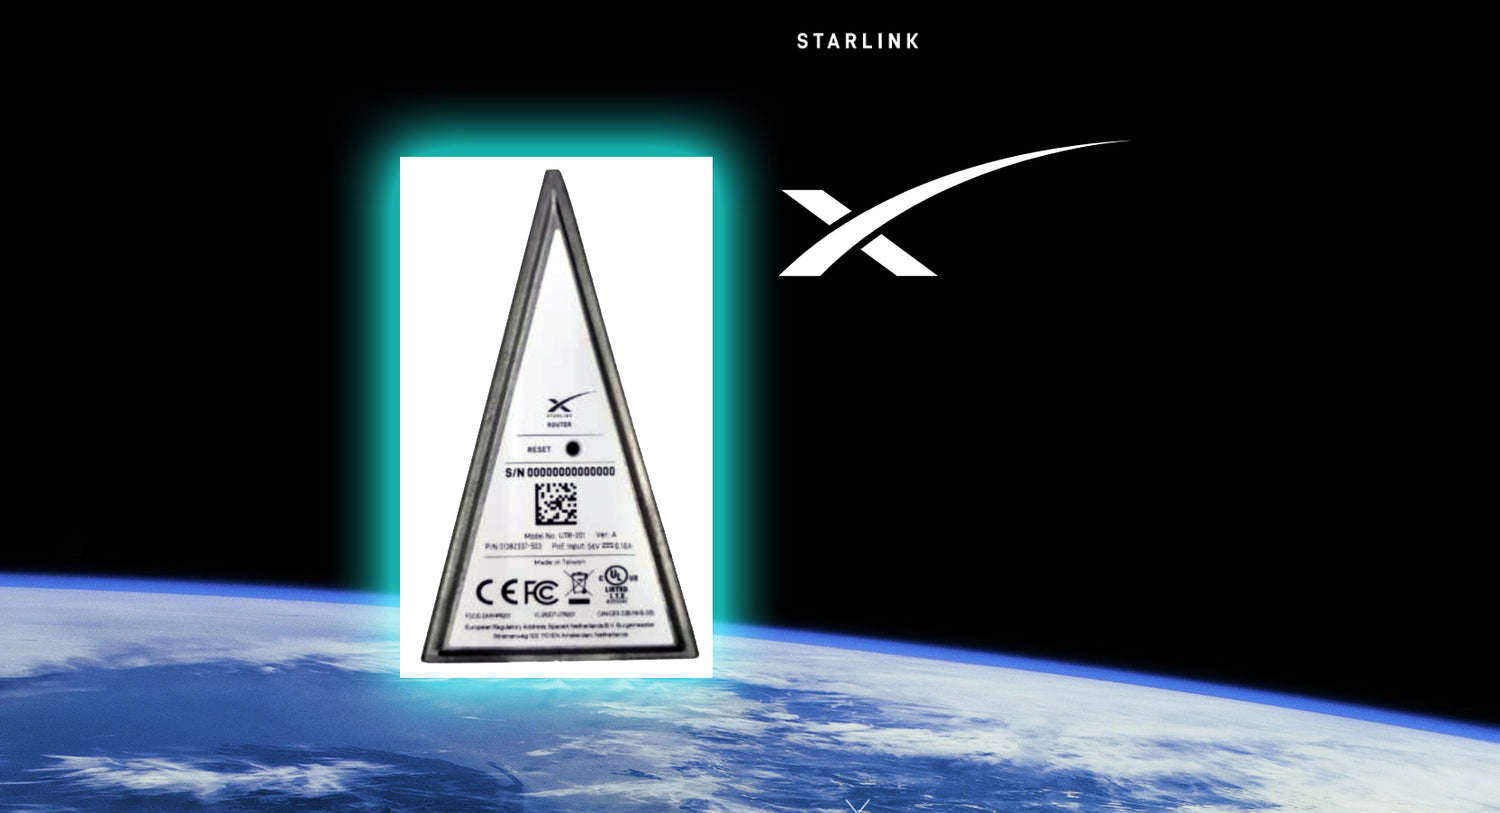 FCC approves the operation of 'Starlink Router' for SpaceX's internet network